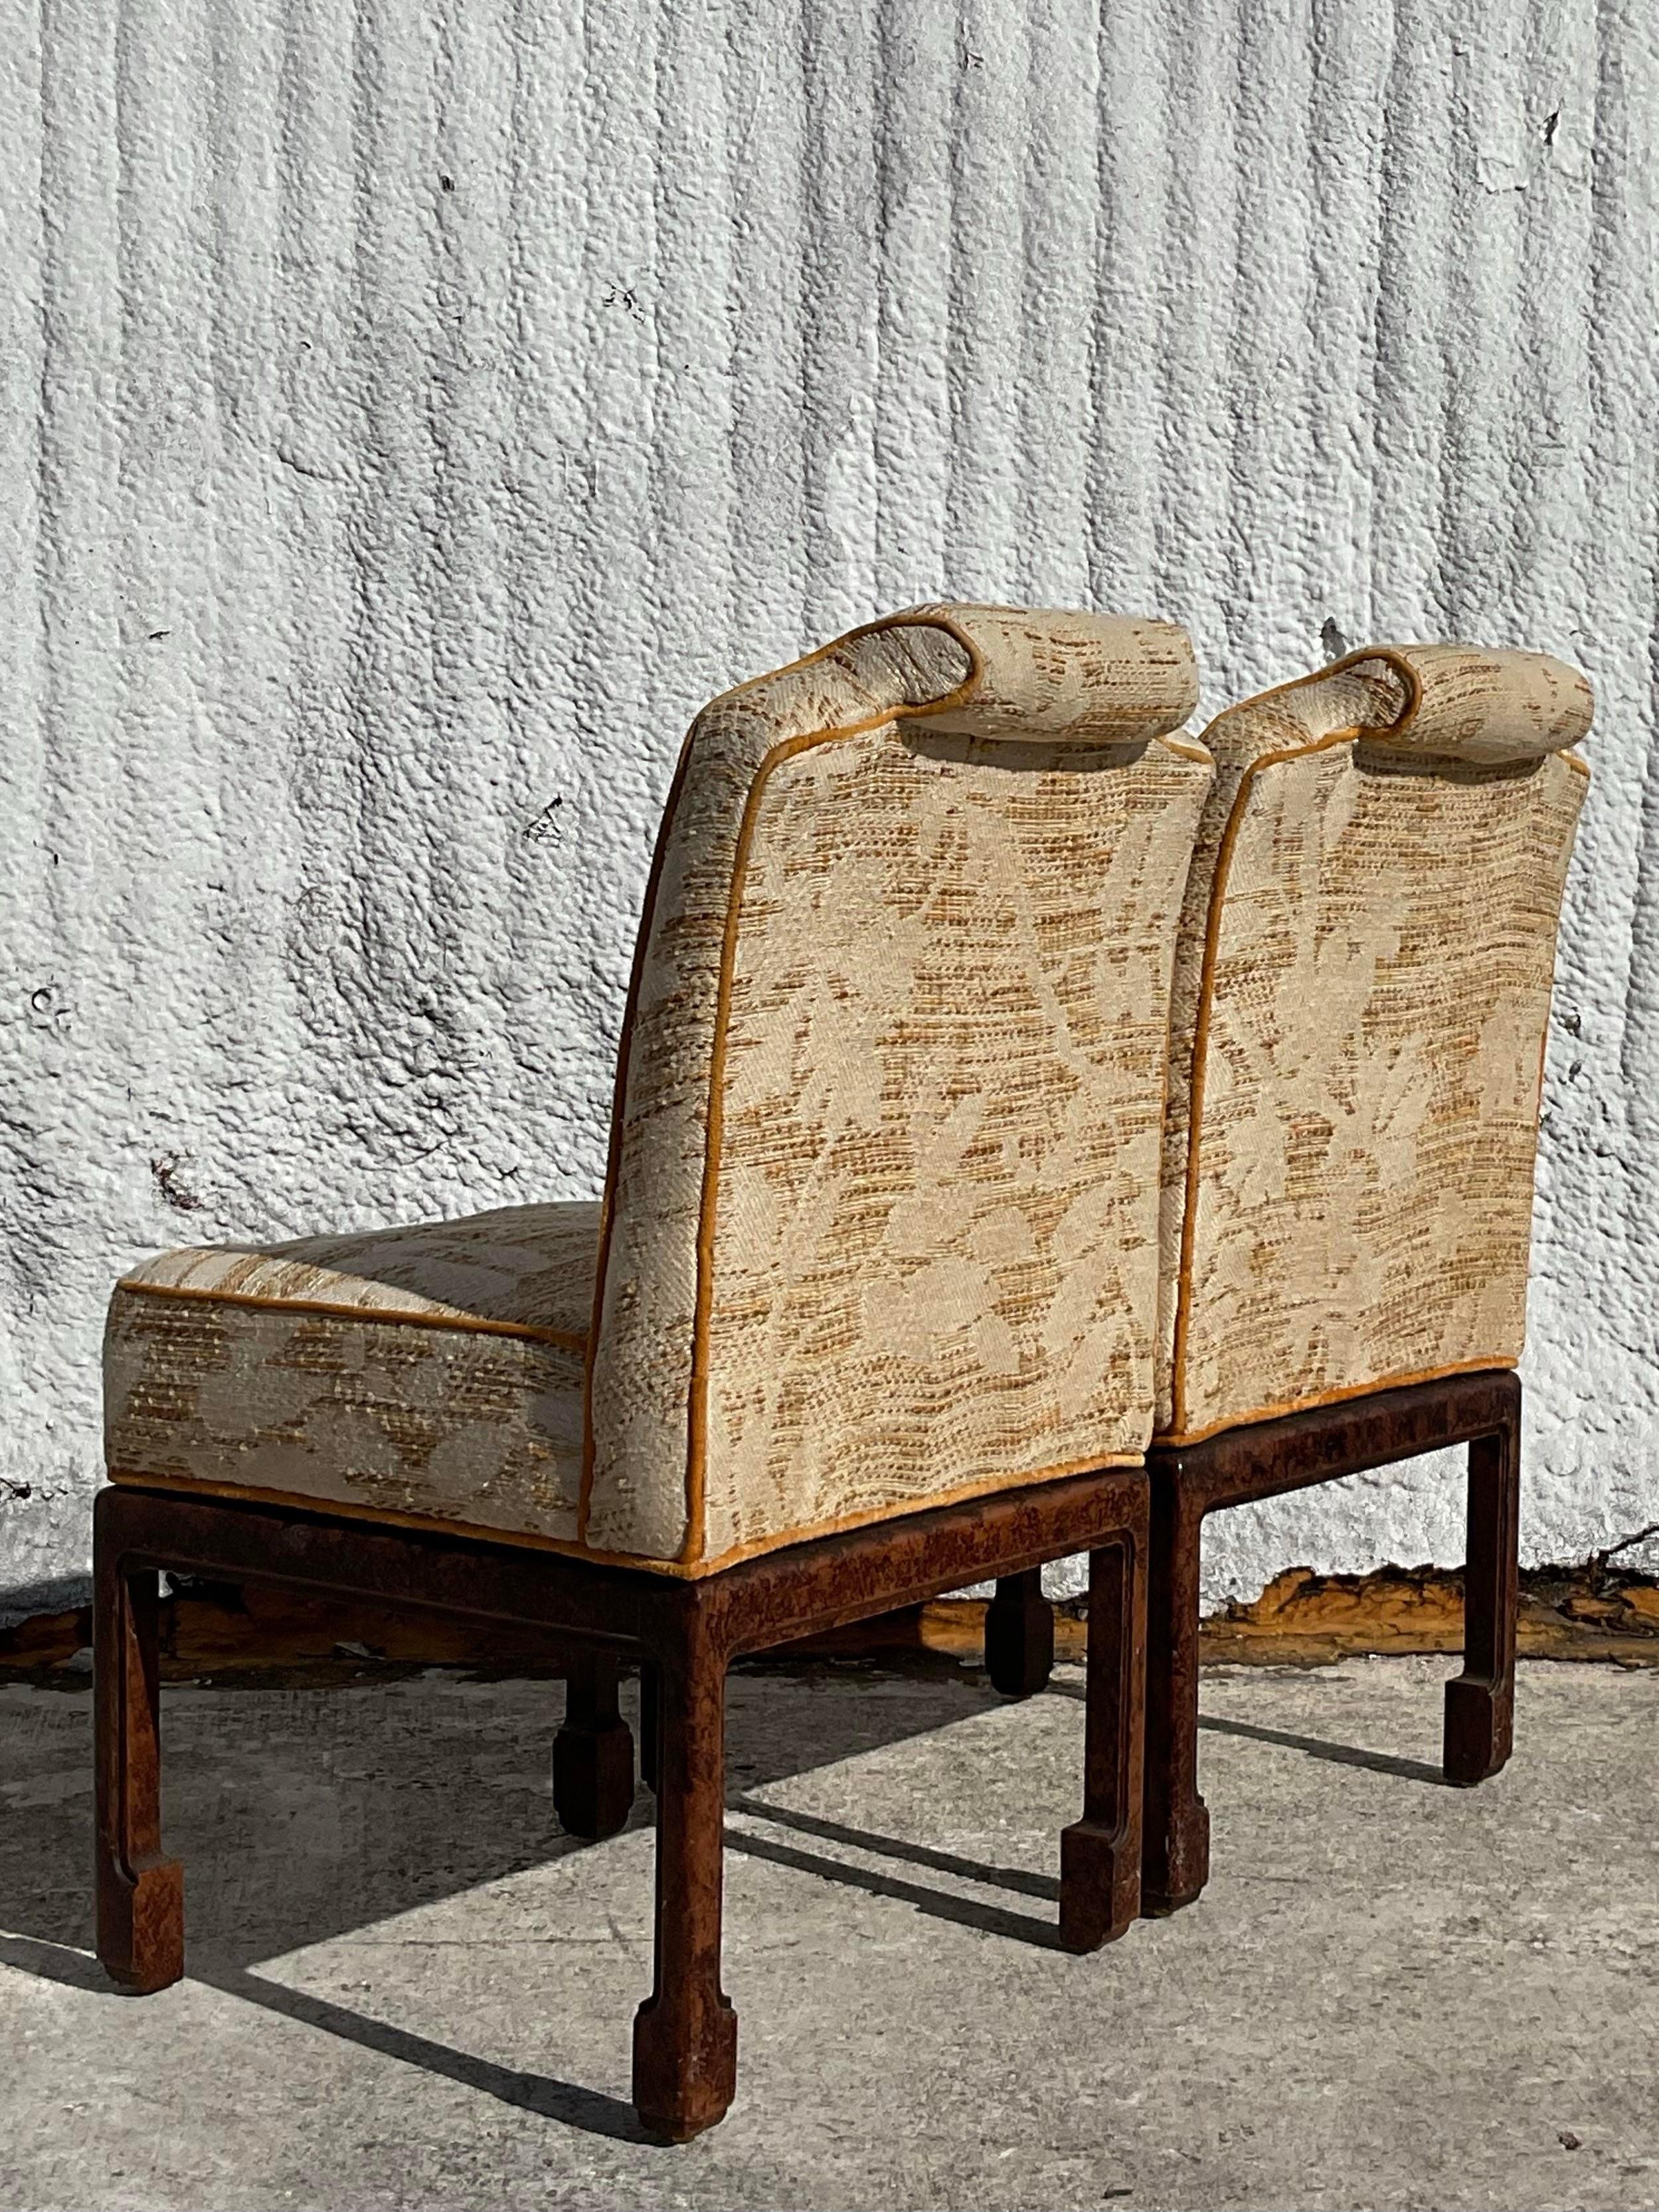 Gorgeous pair of vintage Ming foot slipper chairs with an intricate faux tortoise finish to its legs and a thick tweed with and piping accent. Fabulous addition to any space. Would be gorgeous hall chairs or occasional chairs flanking a credenza.